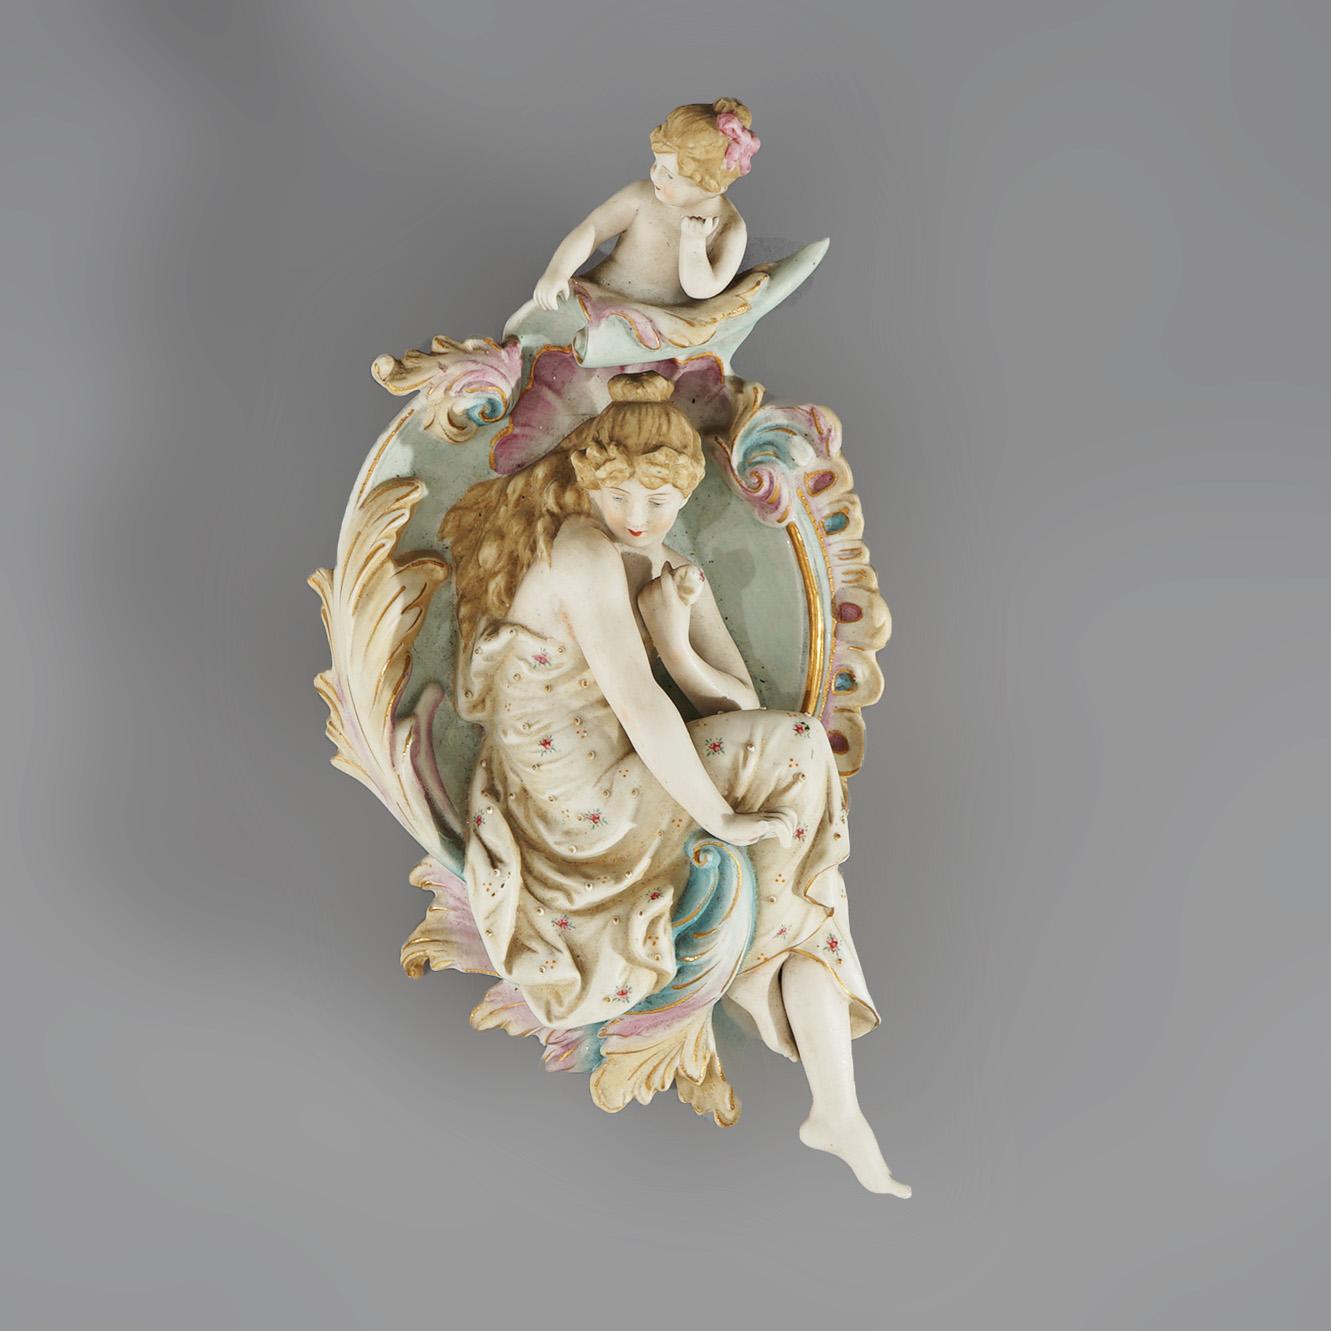 Antique German Porcelain Figural Plaques in the Manner of Meissen with Courting Couple, Cherubs and Foliate Elements C1920

Measures- 12.5''H x 7.75''W x 2.5''D